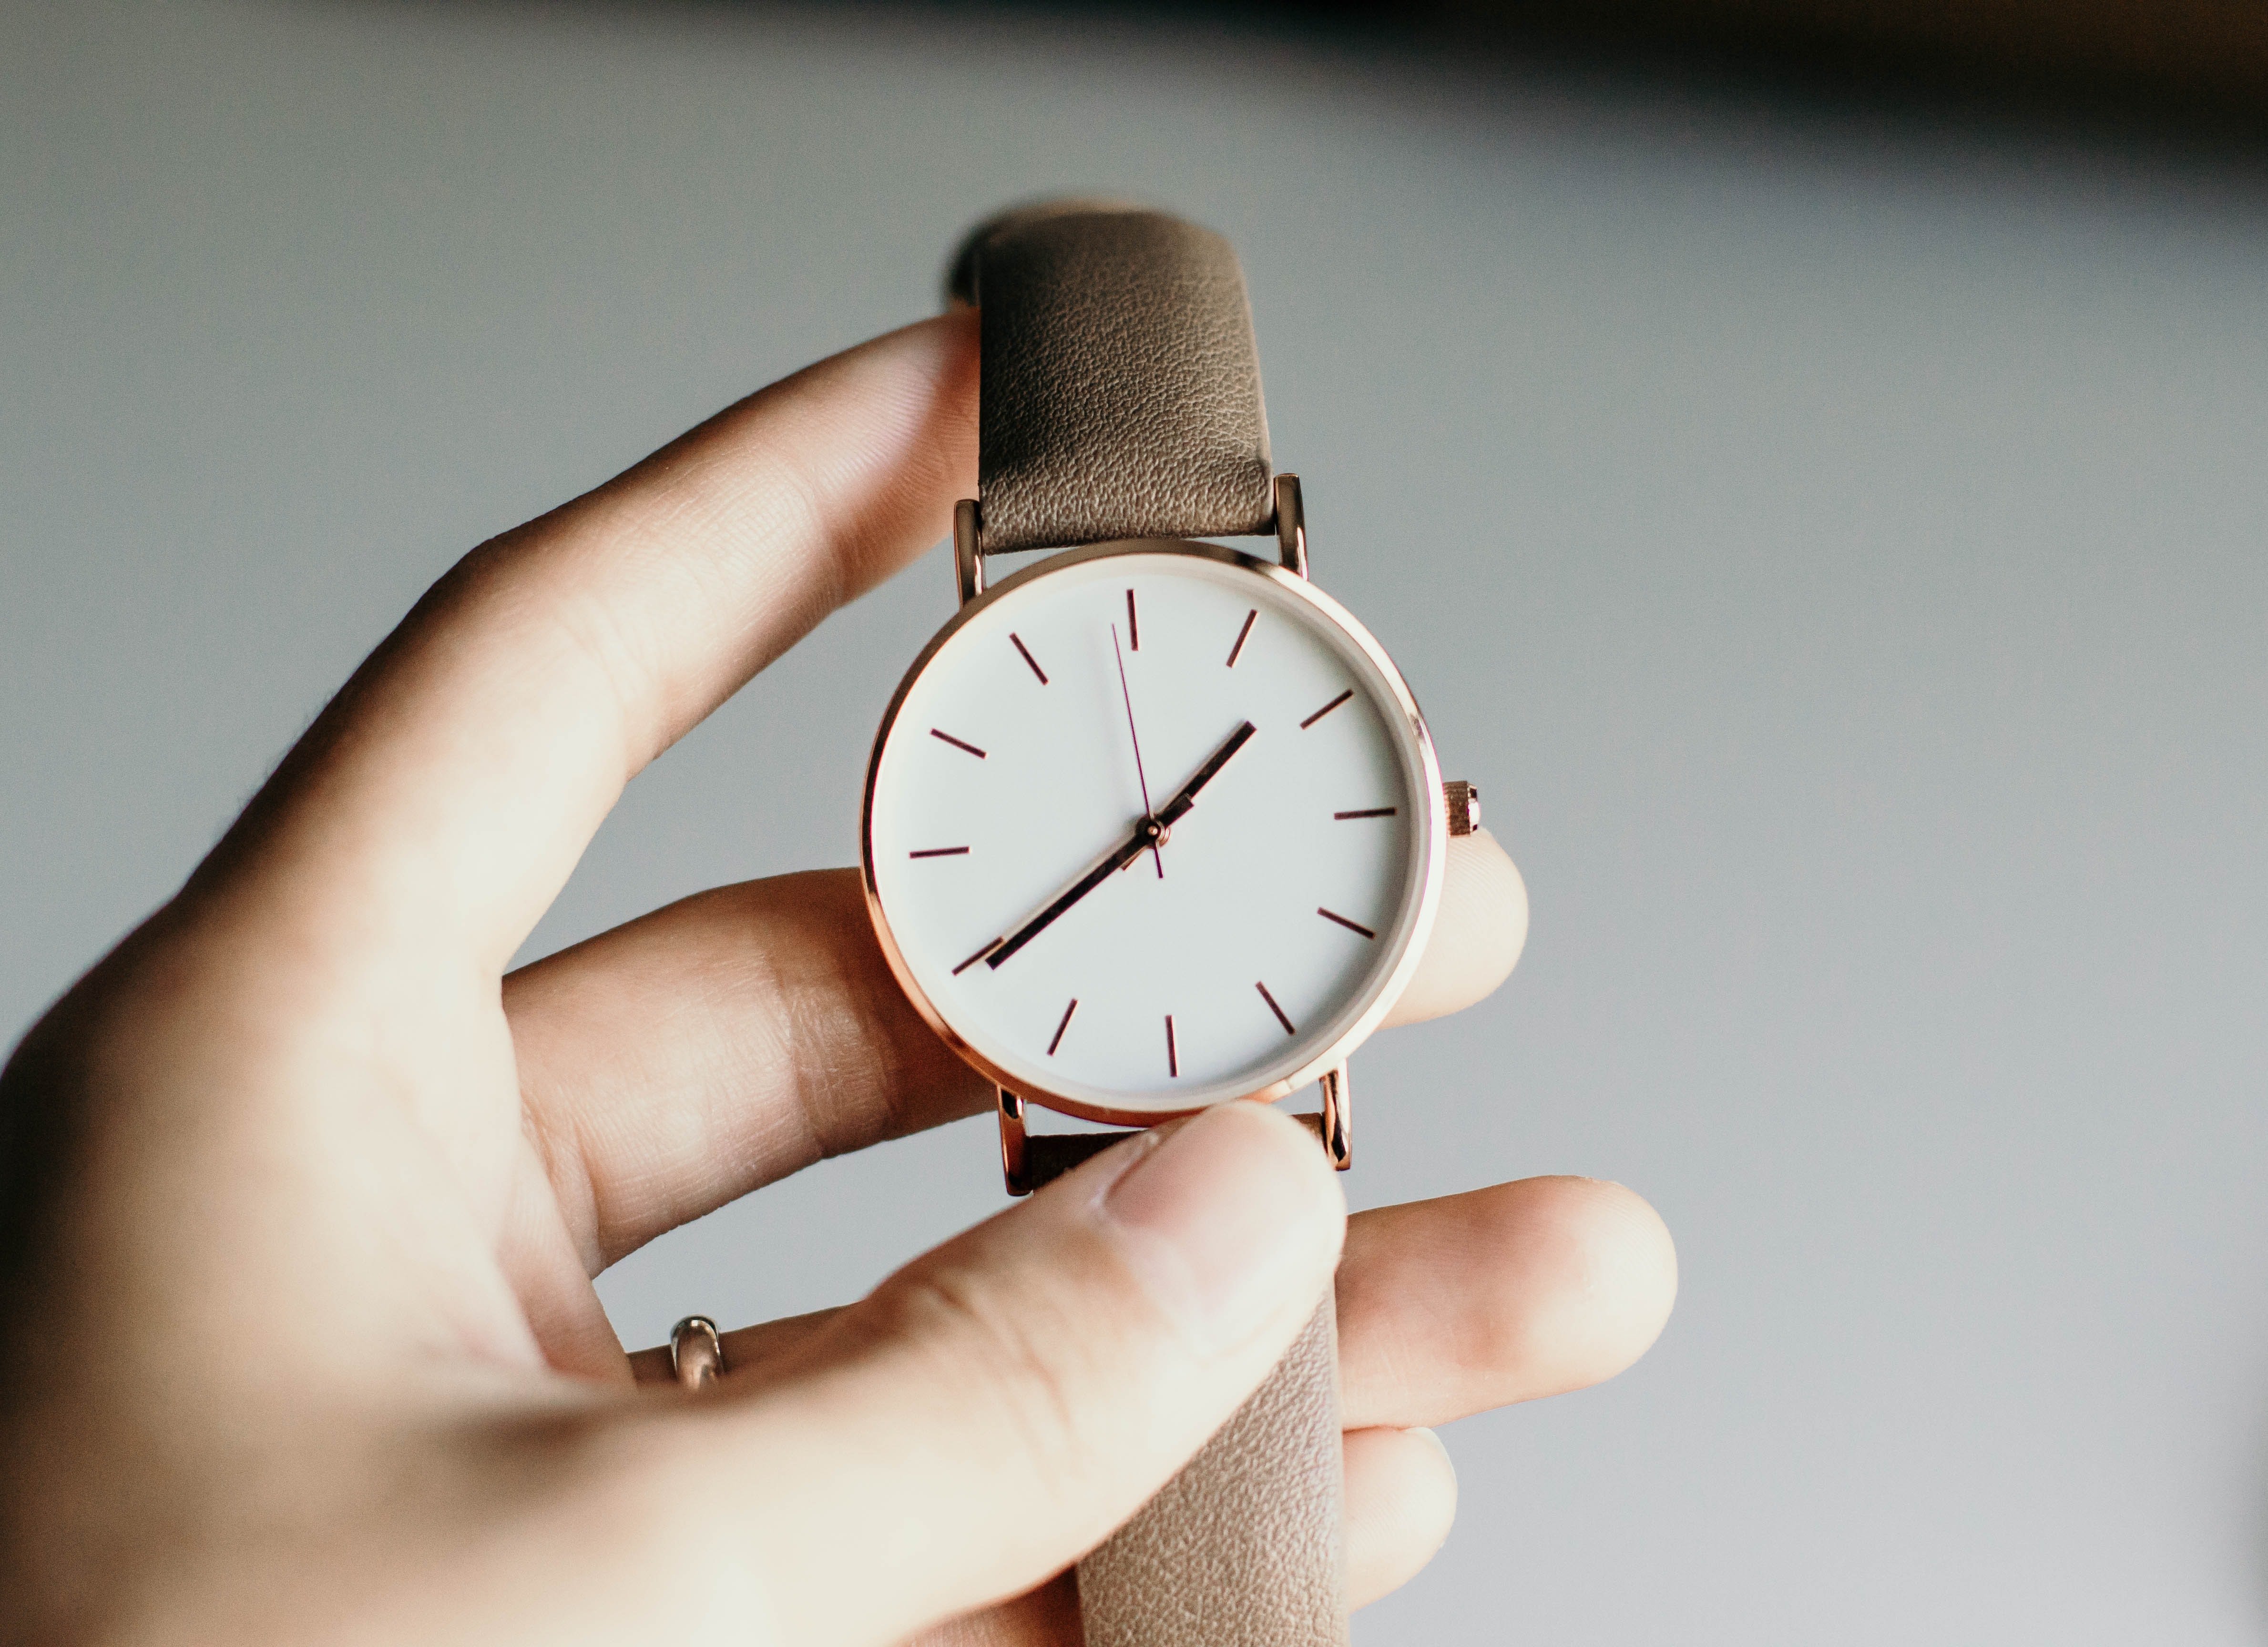 I looked at my watch and waited for Jared to arrive home | Source: Unsplash